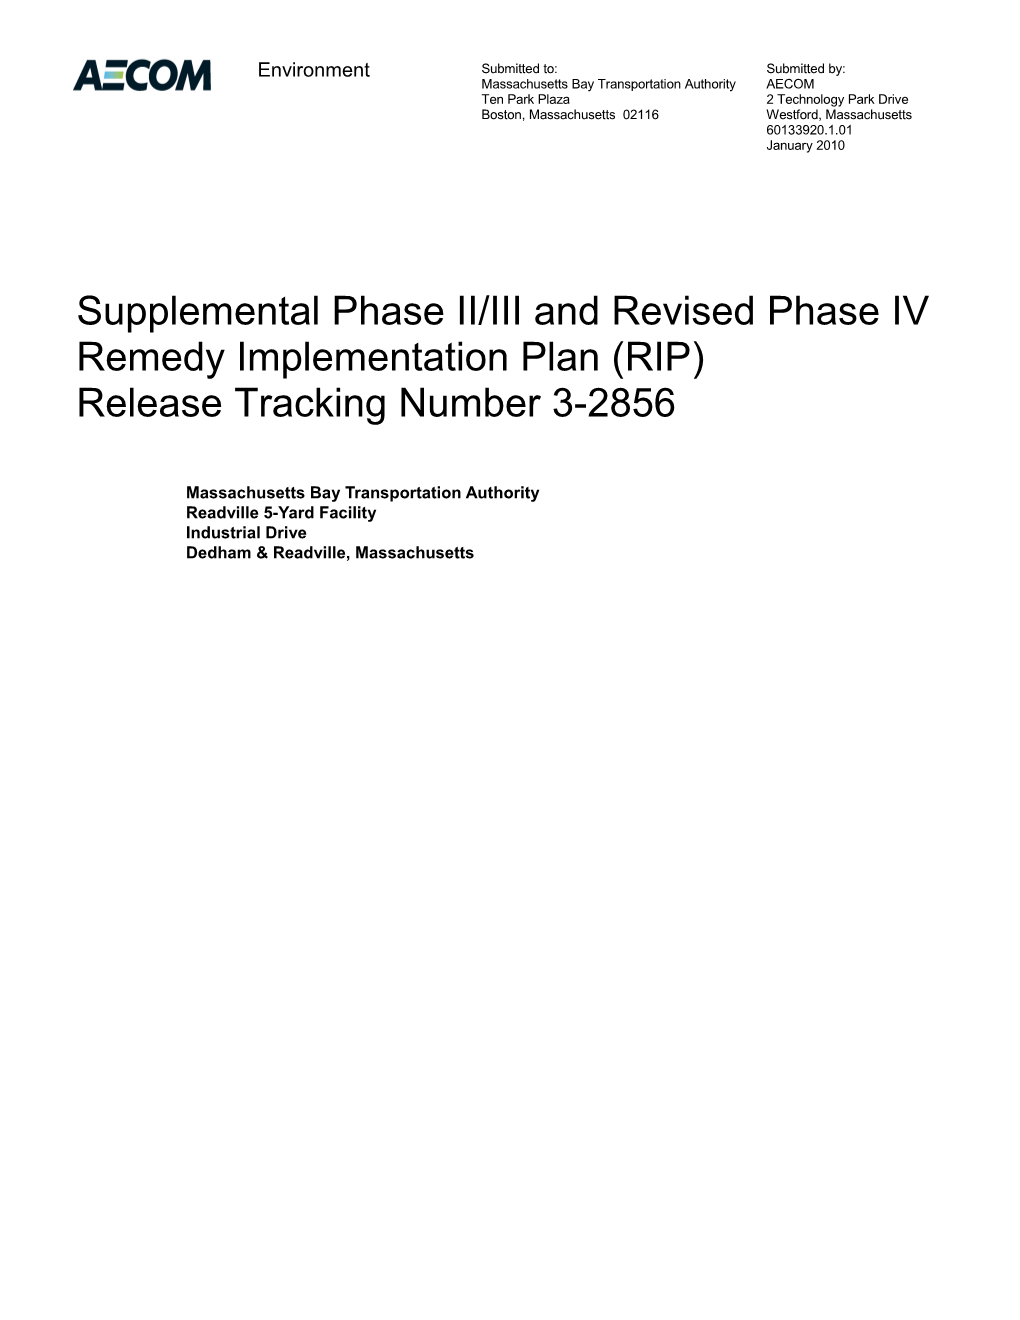 Supplemental Phase II/III Report and Revised Phase IV RIP